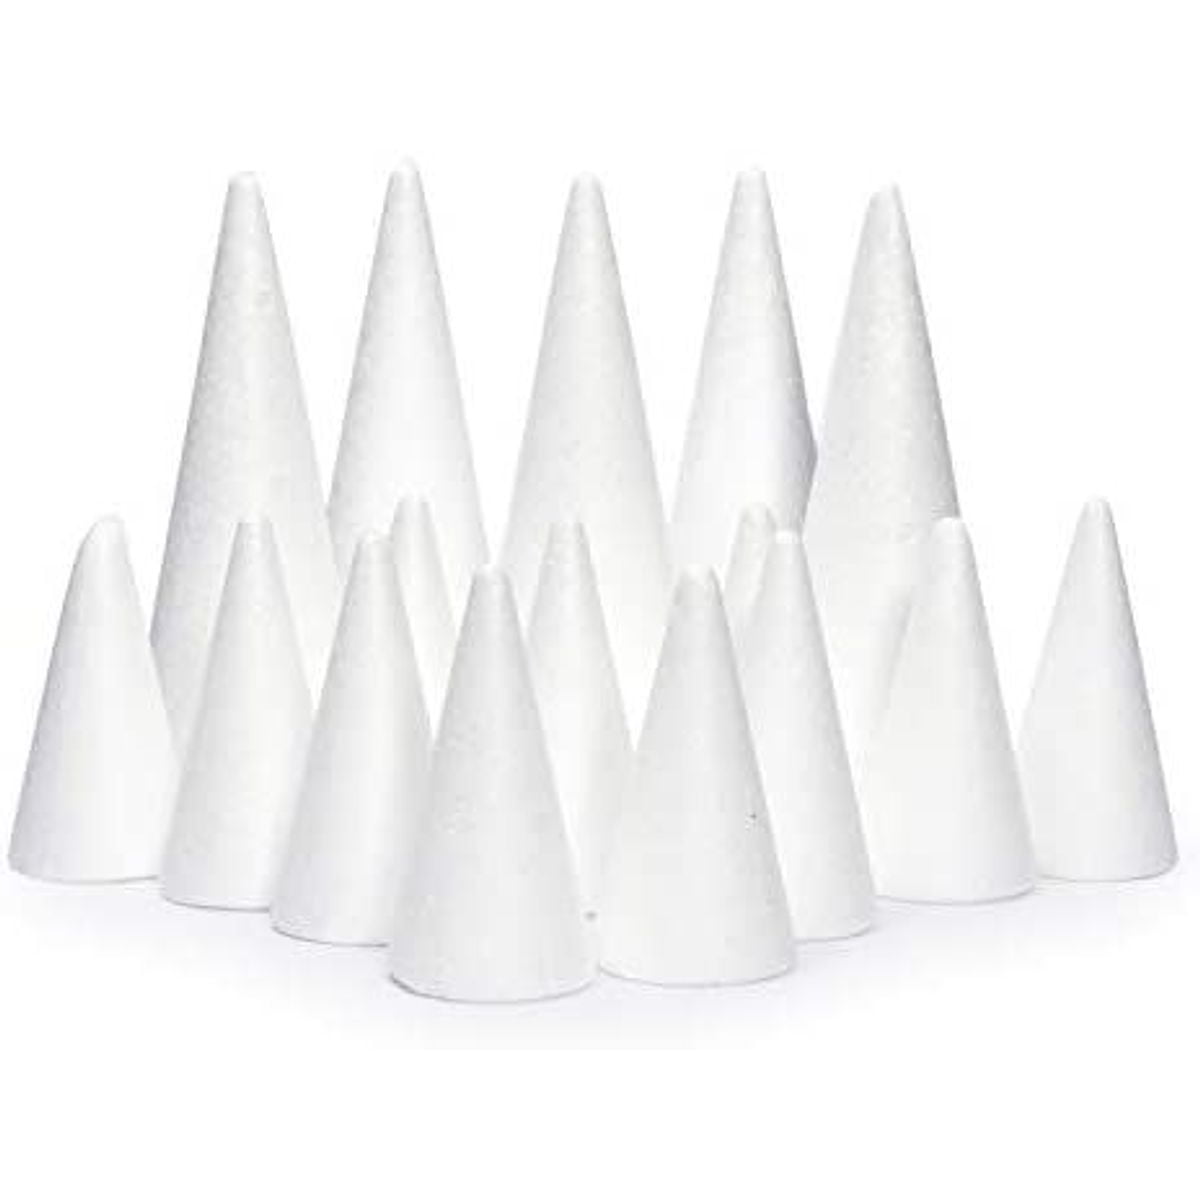 24 Pack Foam Cones for Crafts, DIY Art Projects, Handmade Gnomes, Trees,  Holiday Decorations